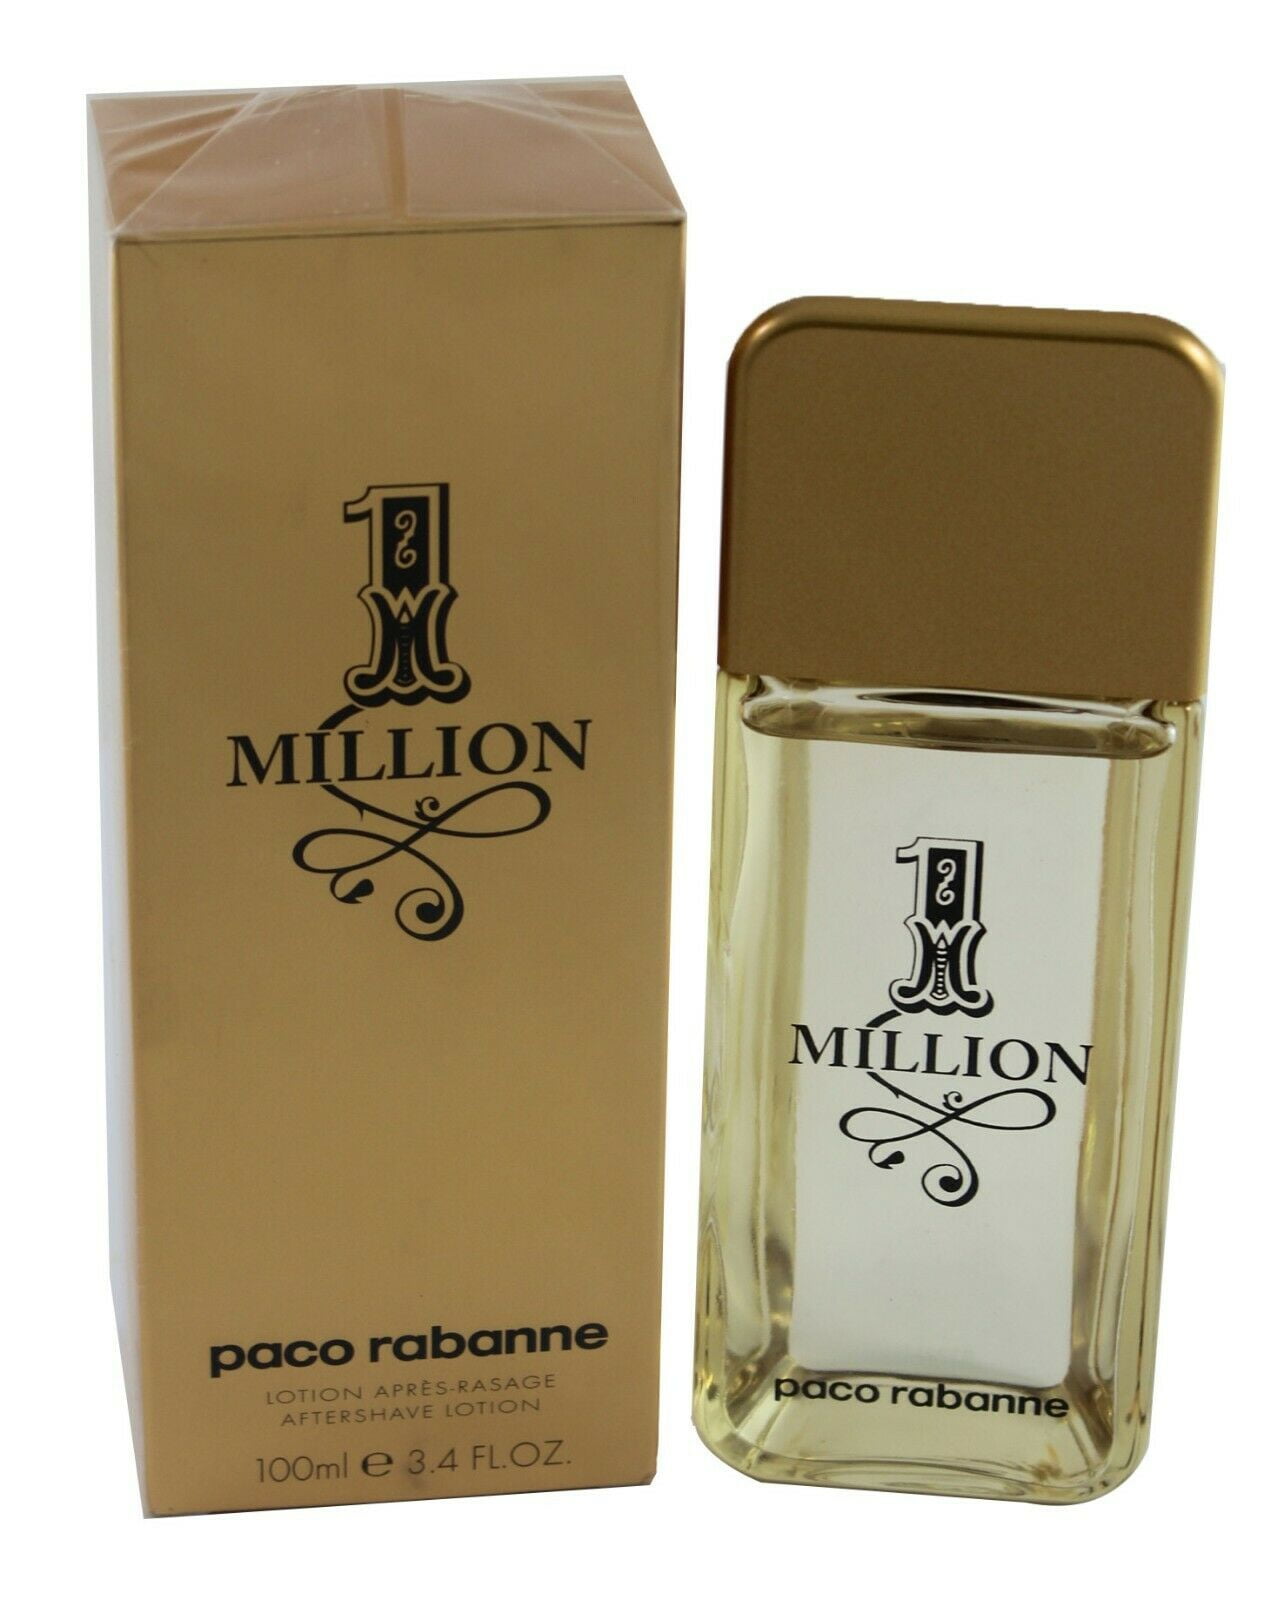 1 Million by Paco Rabanne Aftershave Lotion 3.3/3.4 for Men New In Box - Walmart.com